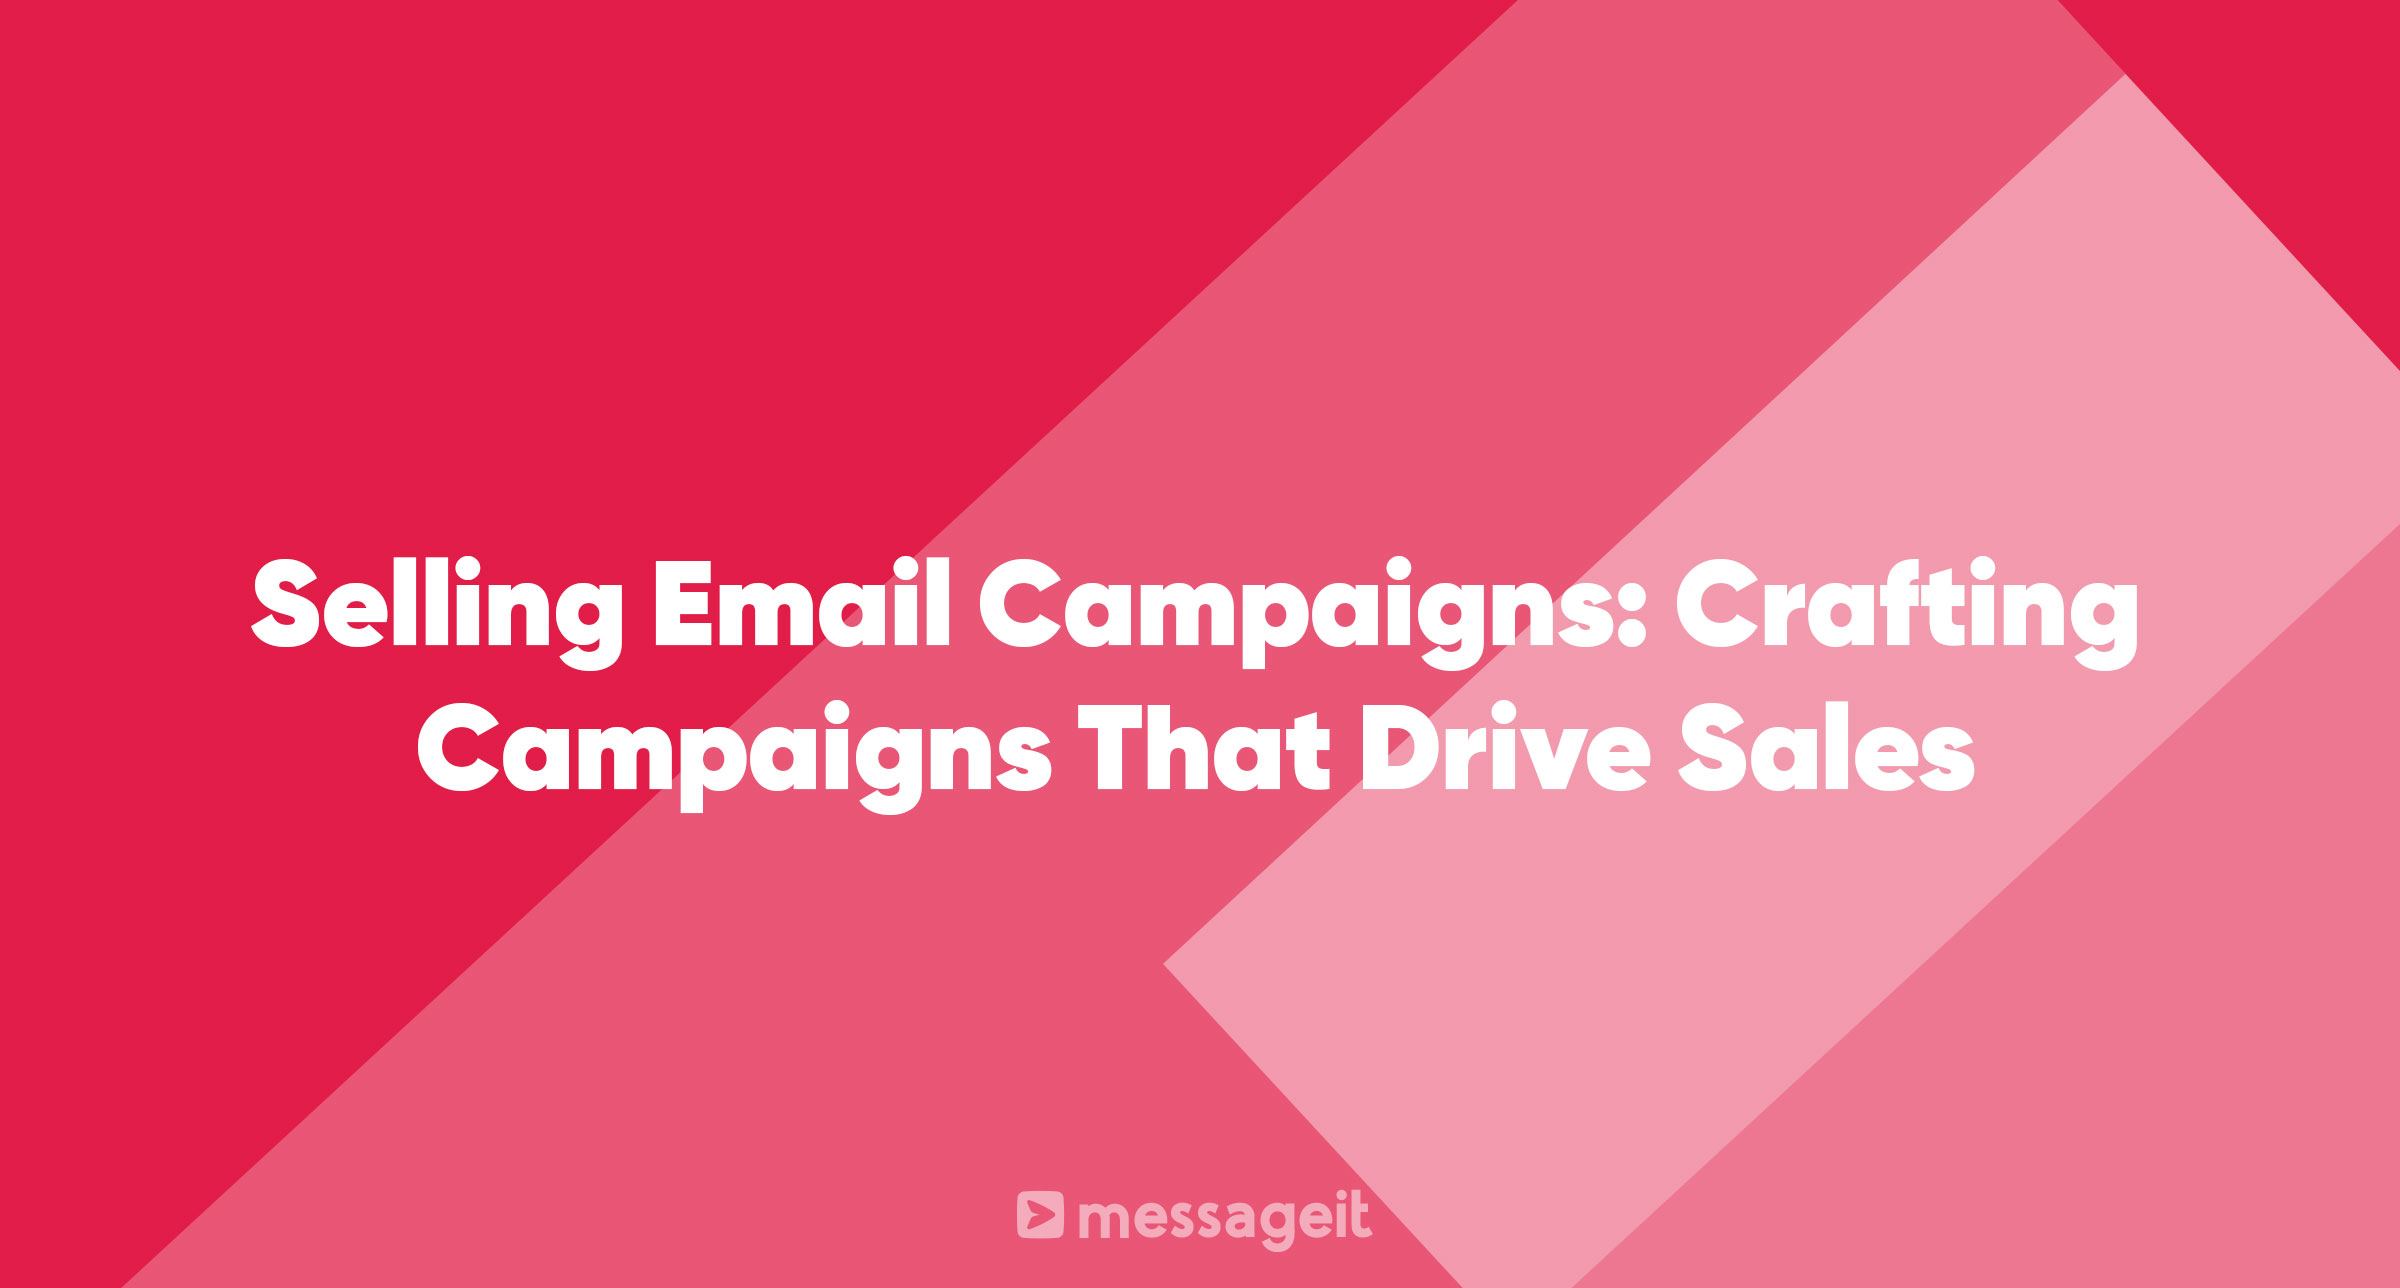 Article | Selling Email Campaigns: Crafting Campaigns That Drive Sales